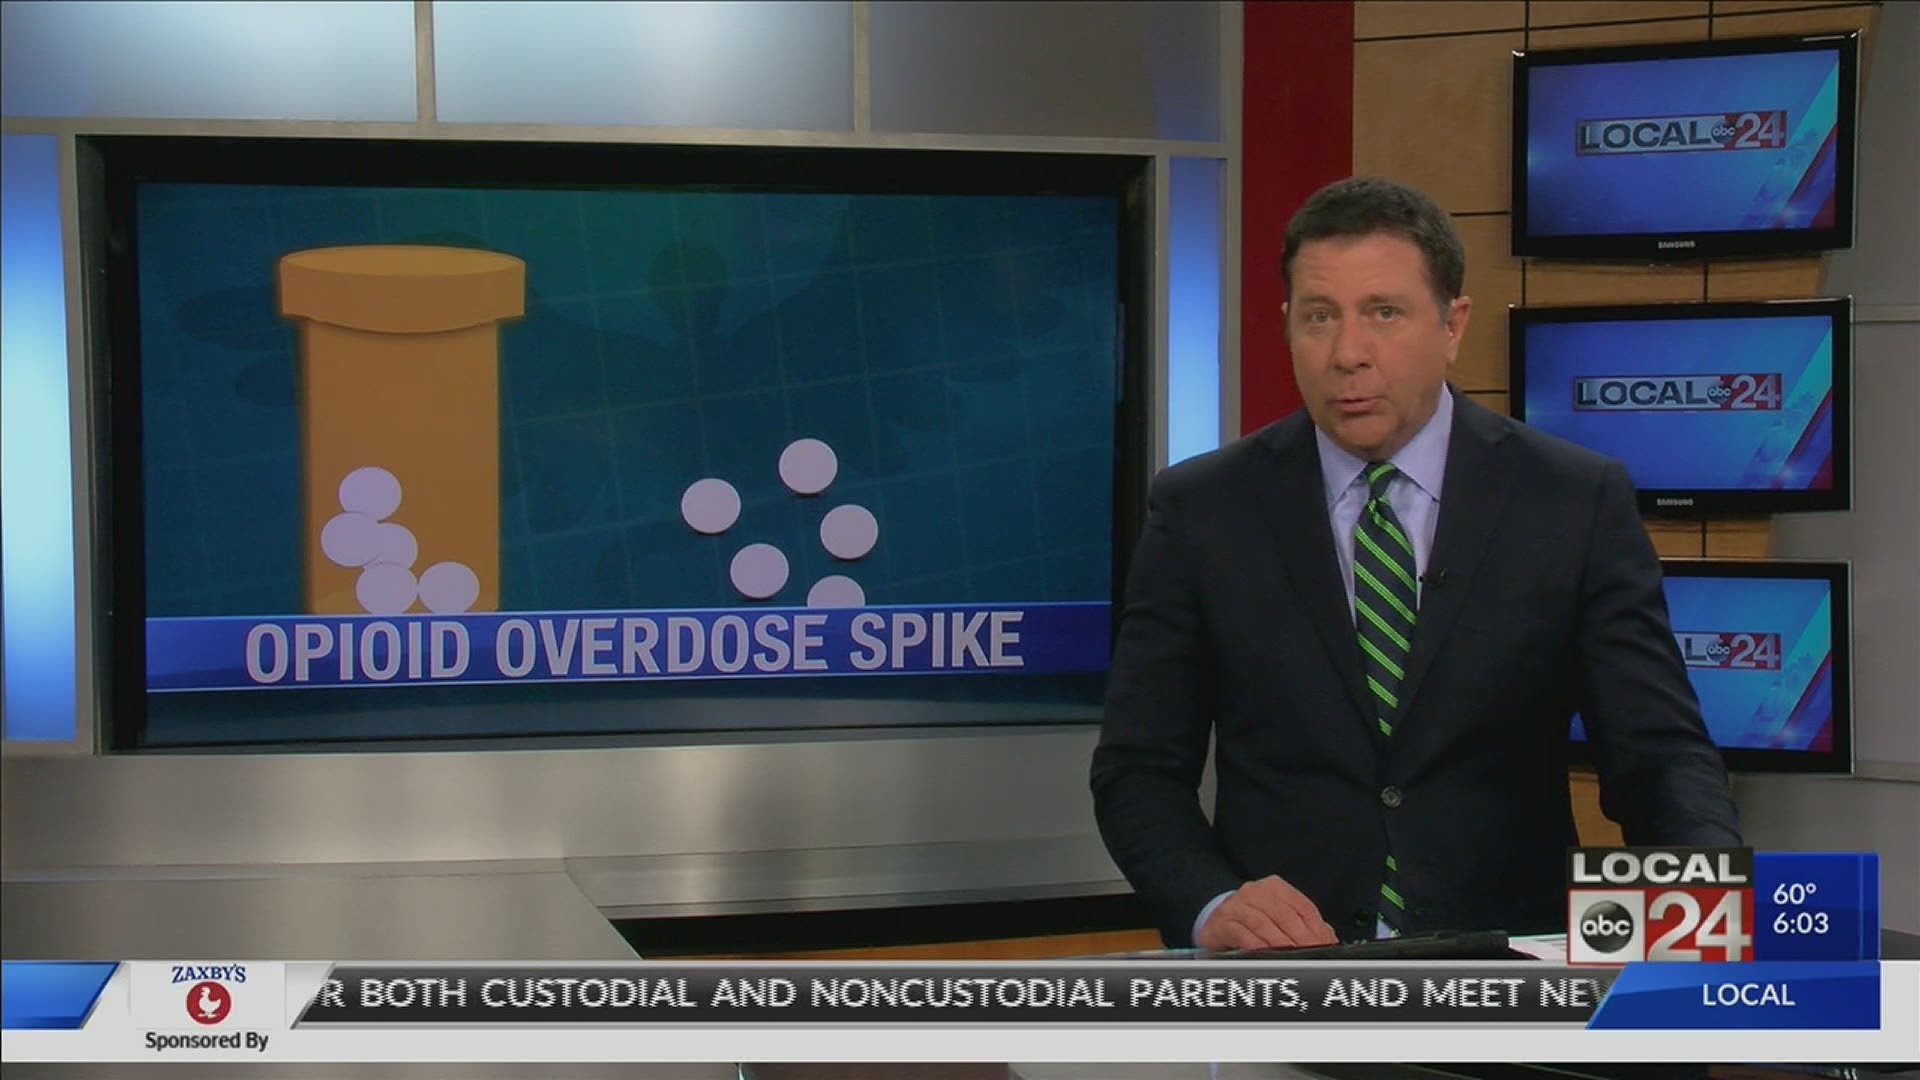 “The contributing factors behind the overdose spike are not clear, but the trend is concerning,” said Alisa Haushalter, Shelby County Health Department Director.